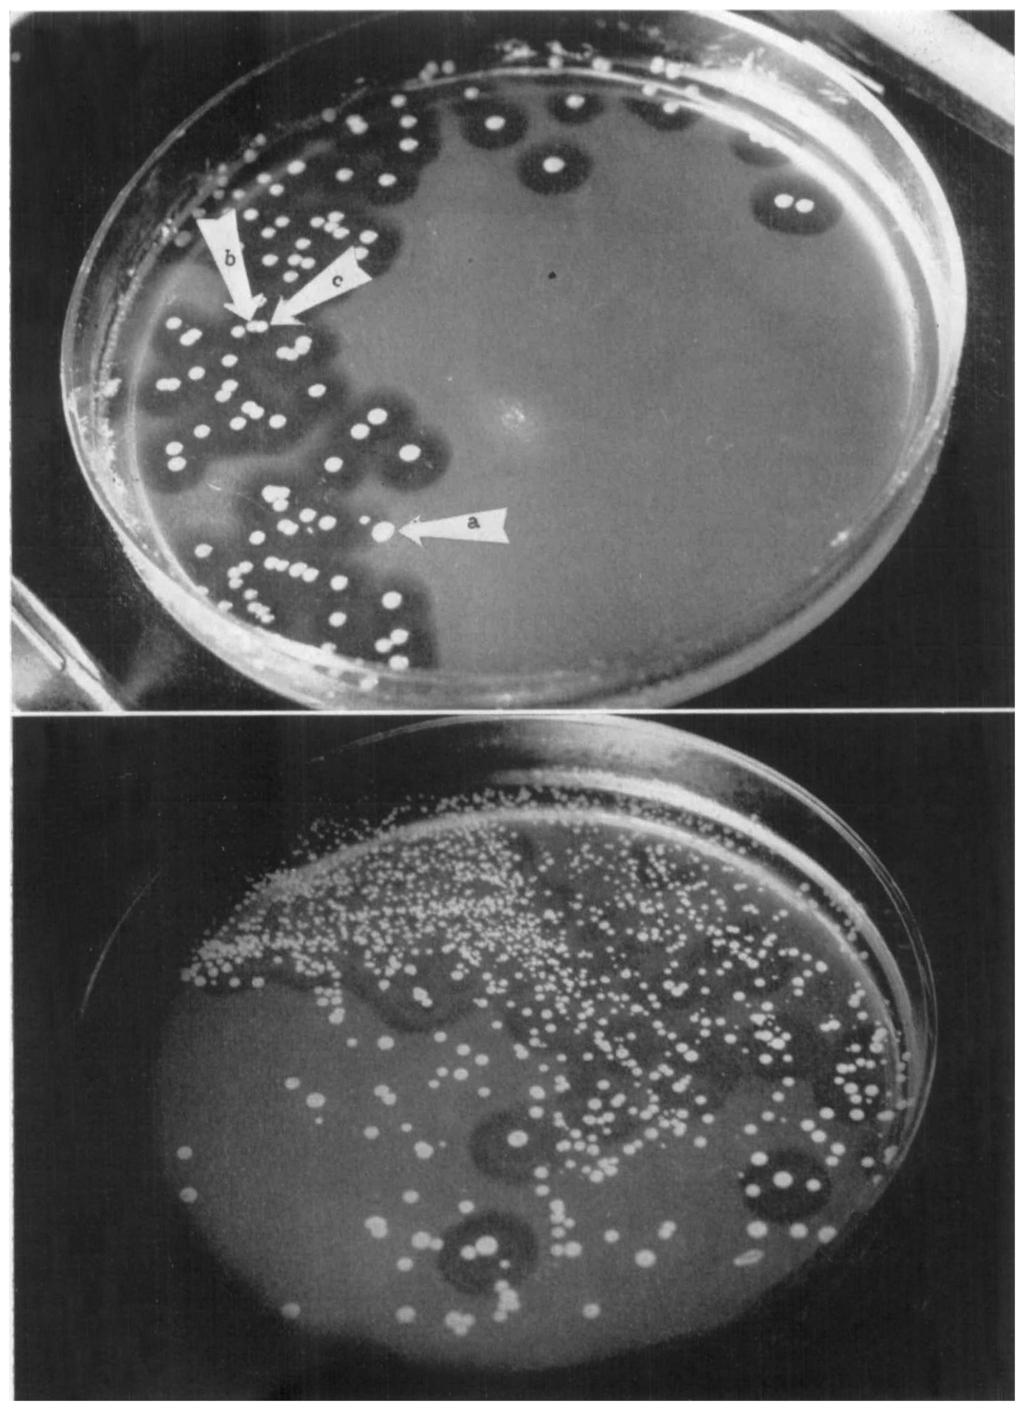 clearing (lipase). Phage types: a, 71; b, 6/47/83A; c, nontypable. Fid. 6 (lower). SMPA with fat emulsion.